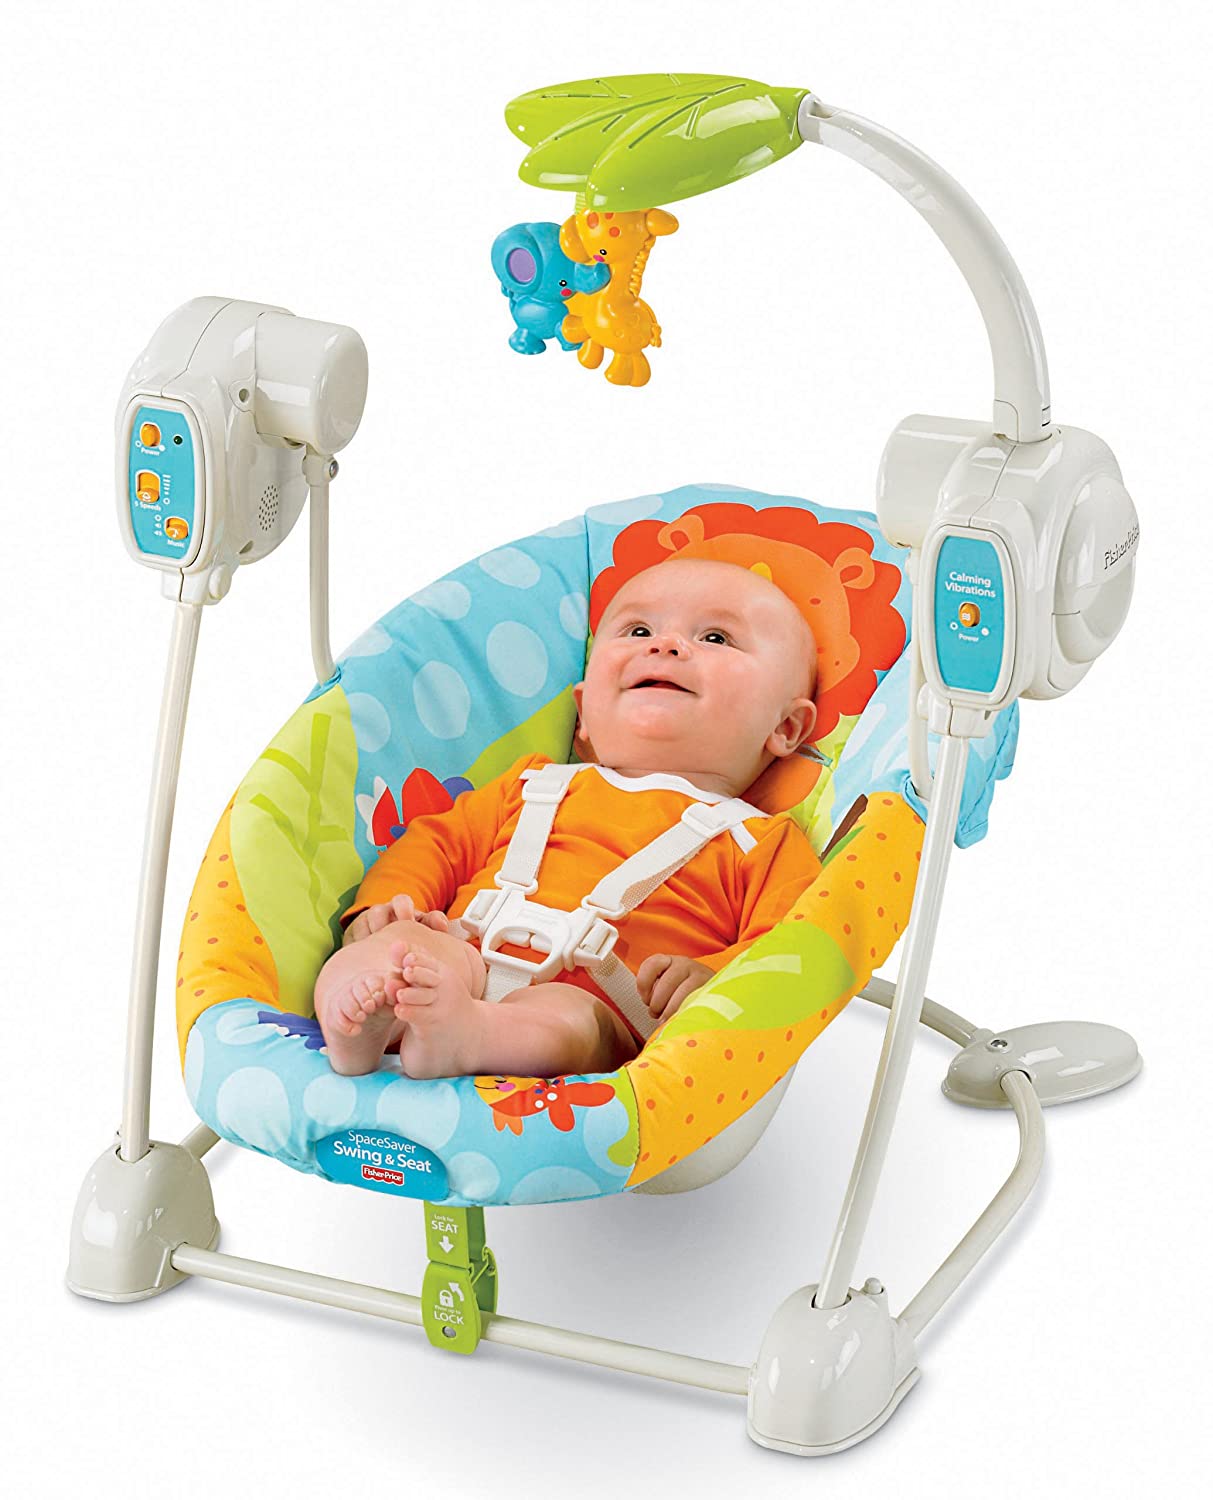 Fisher Price SpaceSaver Swing & Seat